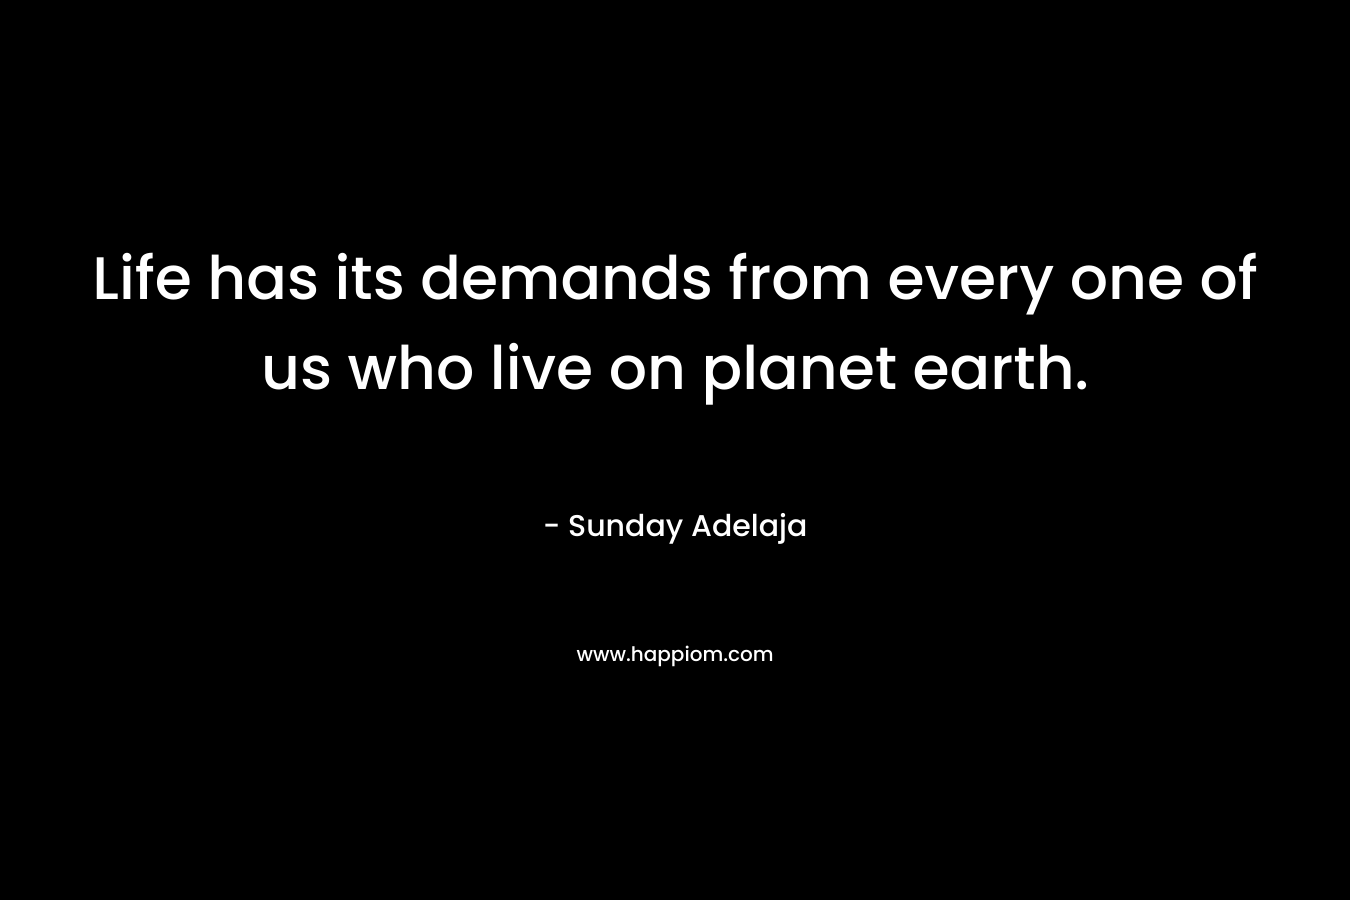 Life has its demands from every one of us who live on planet earth.